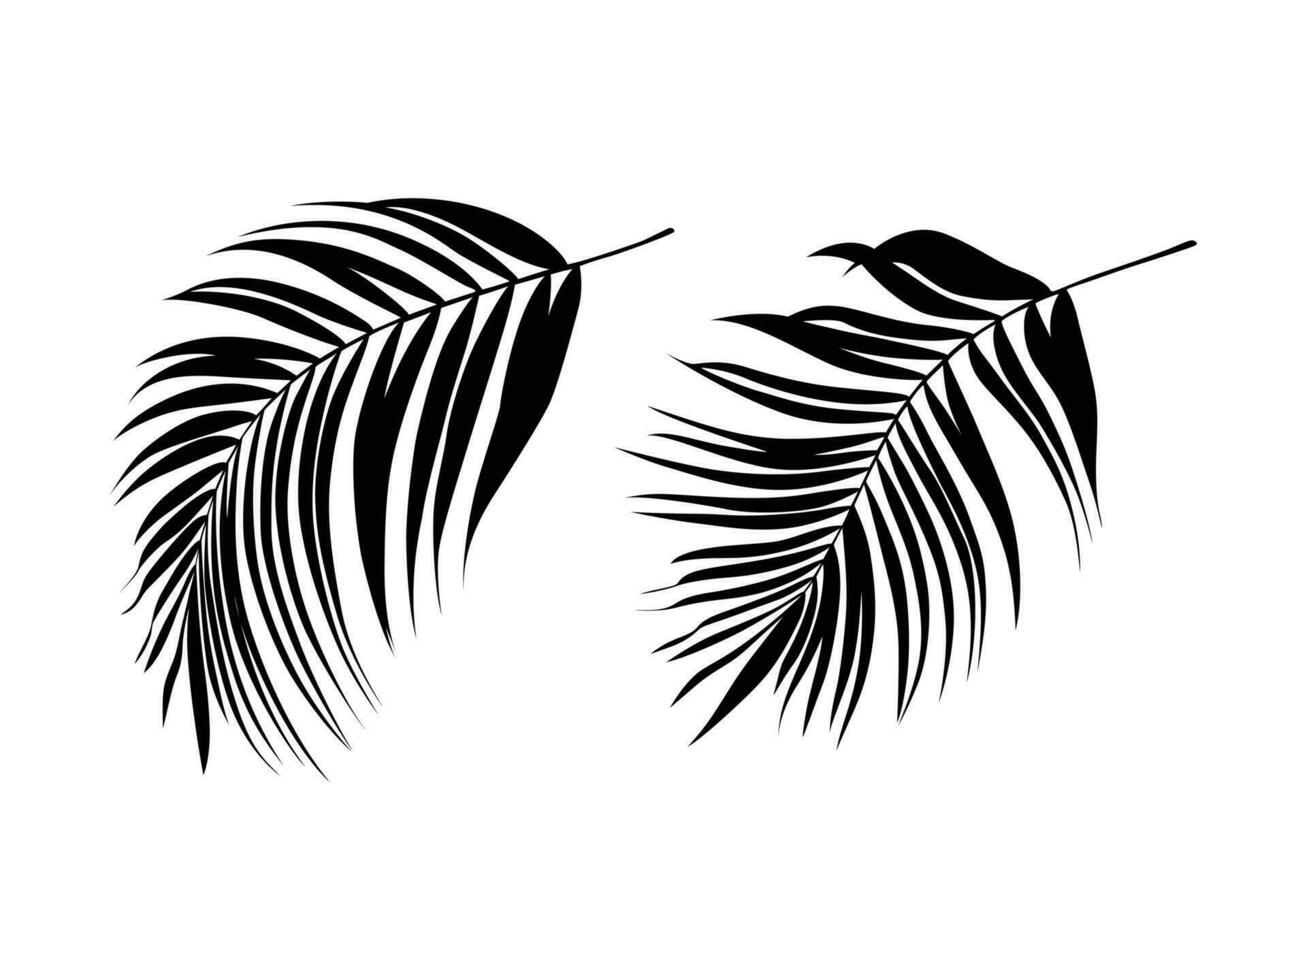 Plant silhouettes as vector images